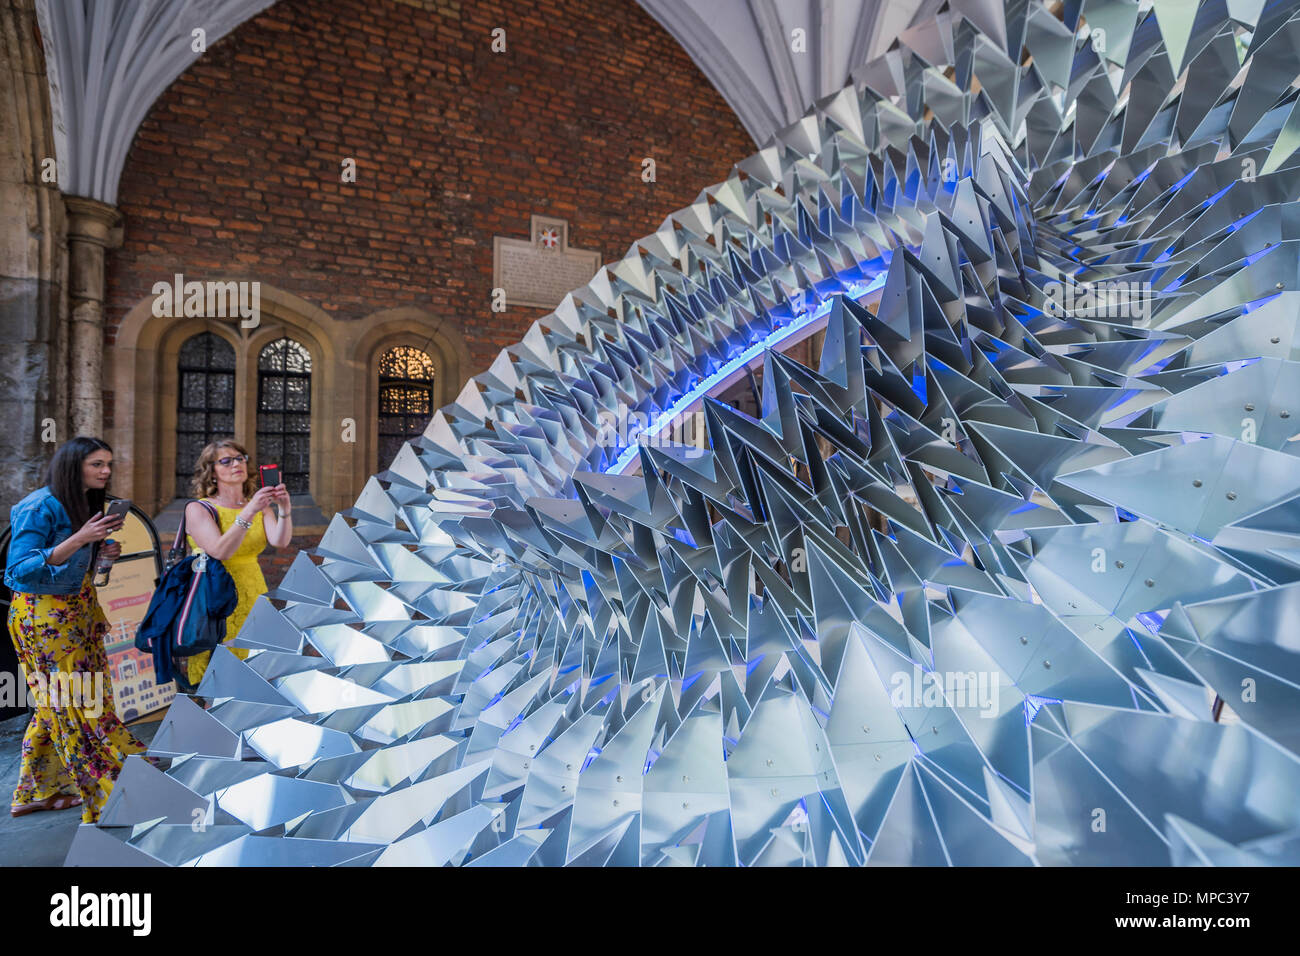 London, UK. 22nd May, 2018. Design bloggers tour the installations. Royal Approval the biggest Elizabethan ruff ever created - made from sheet aluminium folded in an origami way, it has been created by Kinetech Design in collaboration with Amari Interiors and Timberfusion. It is in St John's Gate which saw the first performances of some of Shakespeare's most famous works - Outdoor installations for Clerkenwell Design Week, which starts today. Credit: Guy Bell/Alamy Live News Stock Photo